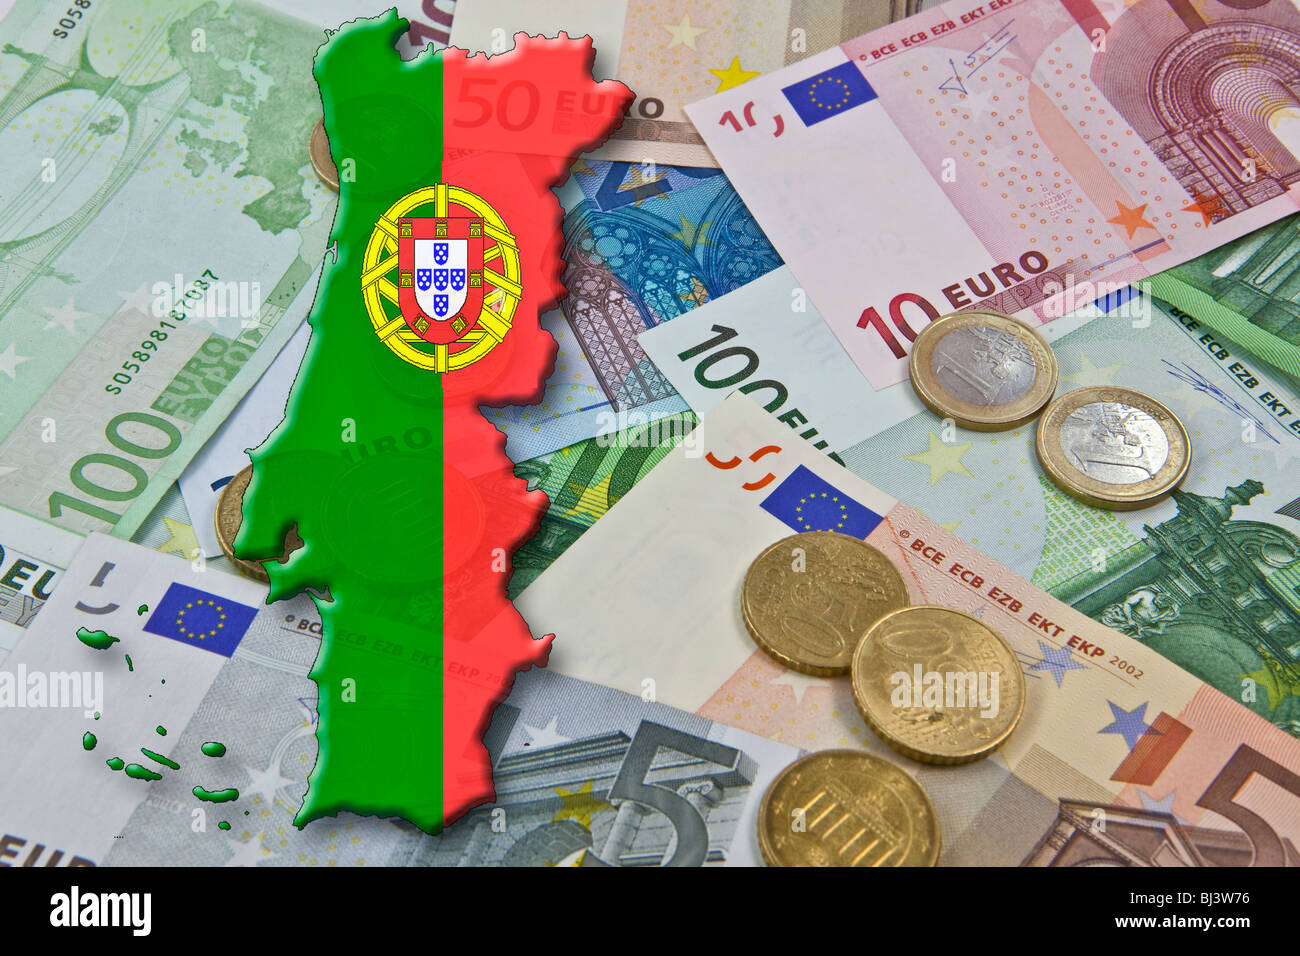 Euro and Portugal, euro stability pact, Portugal as a euro 'deficit sinner' Stock Photo